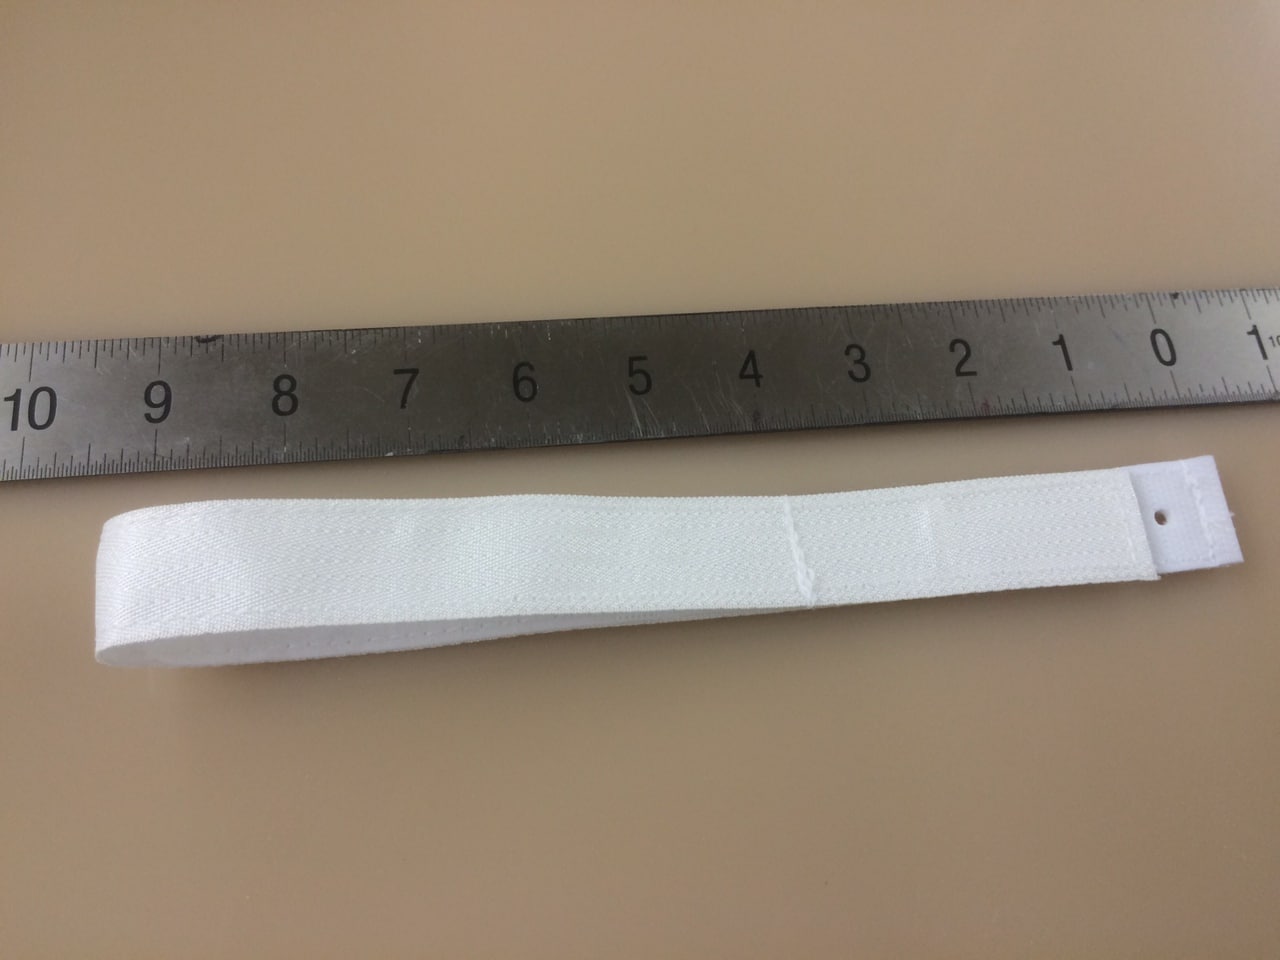 Replacement Strap - 20” (Extra Long) by 2" in Vinyl